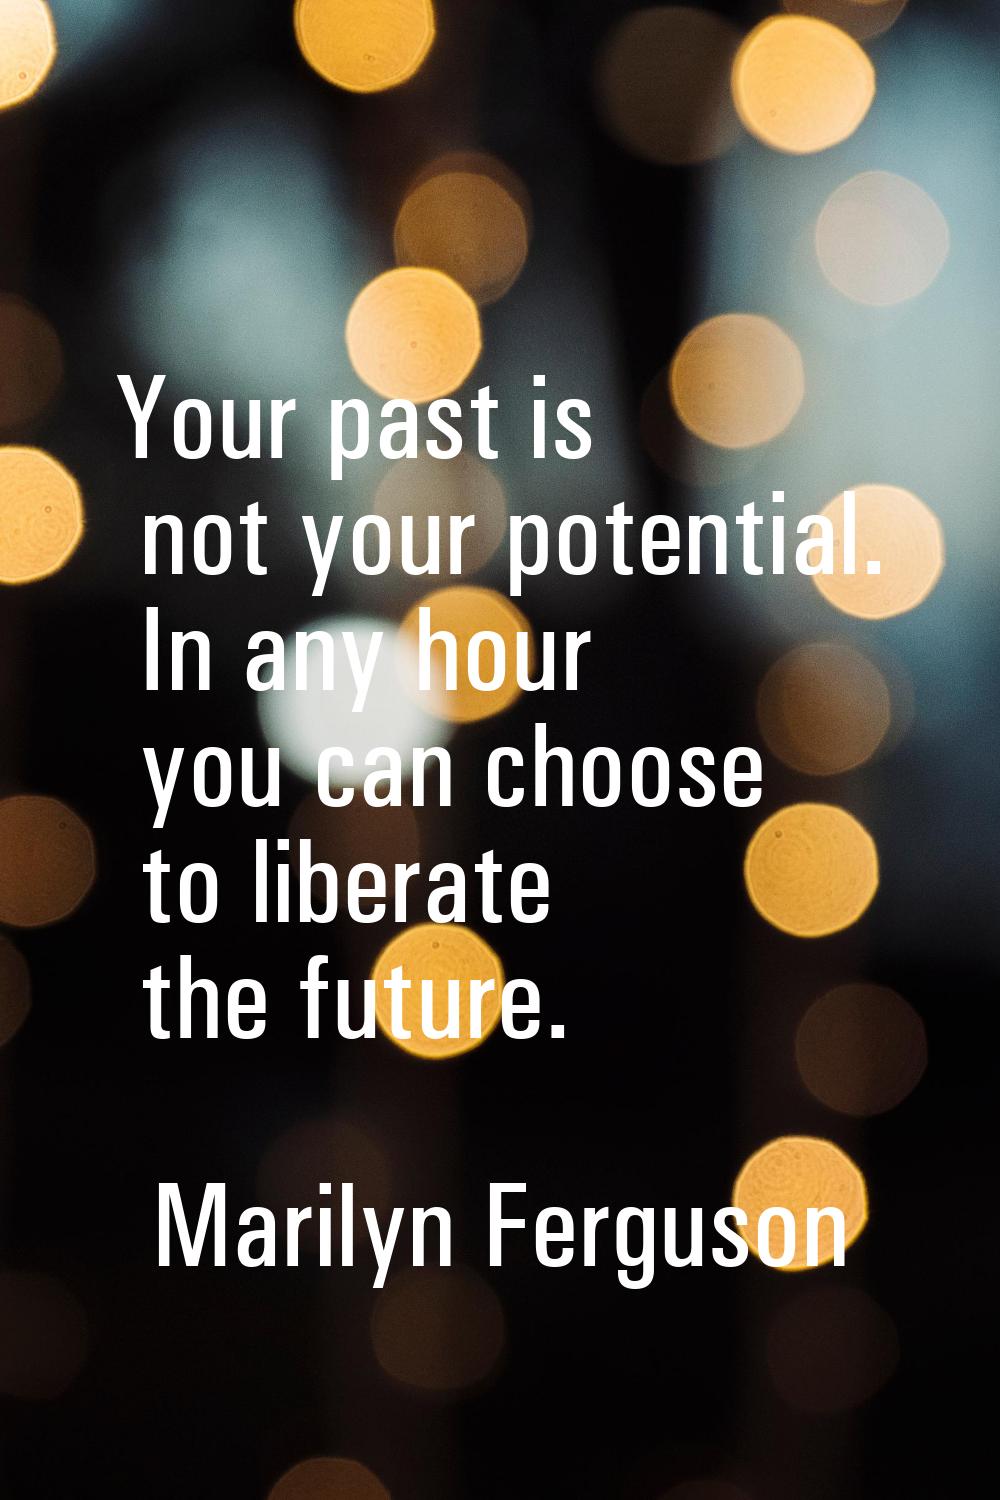 Your past is not your potential. In any hour you can choose to liberate the future.